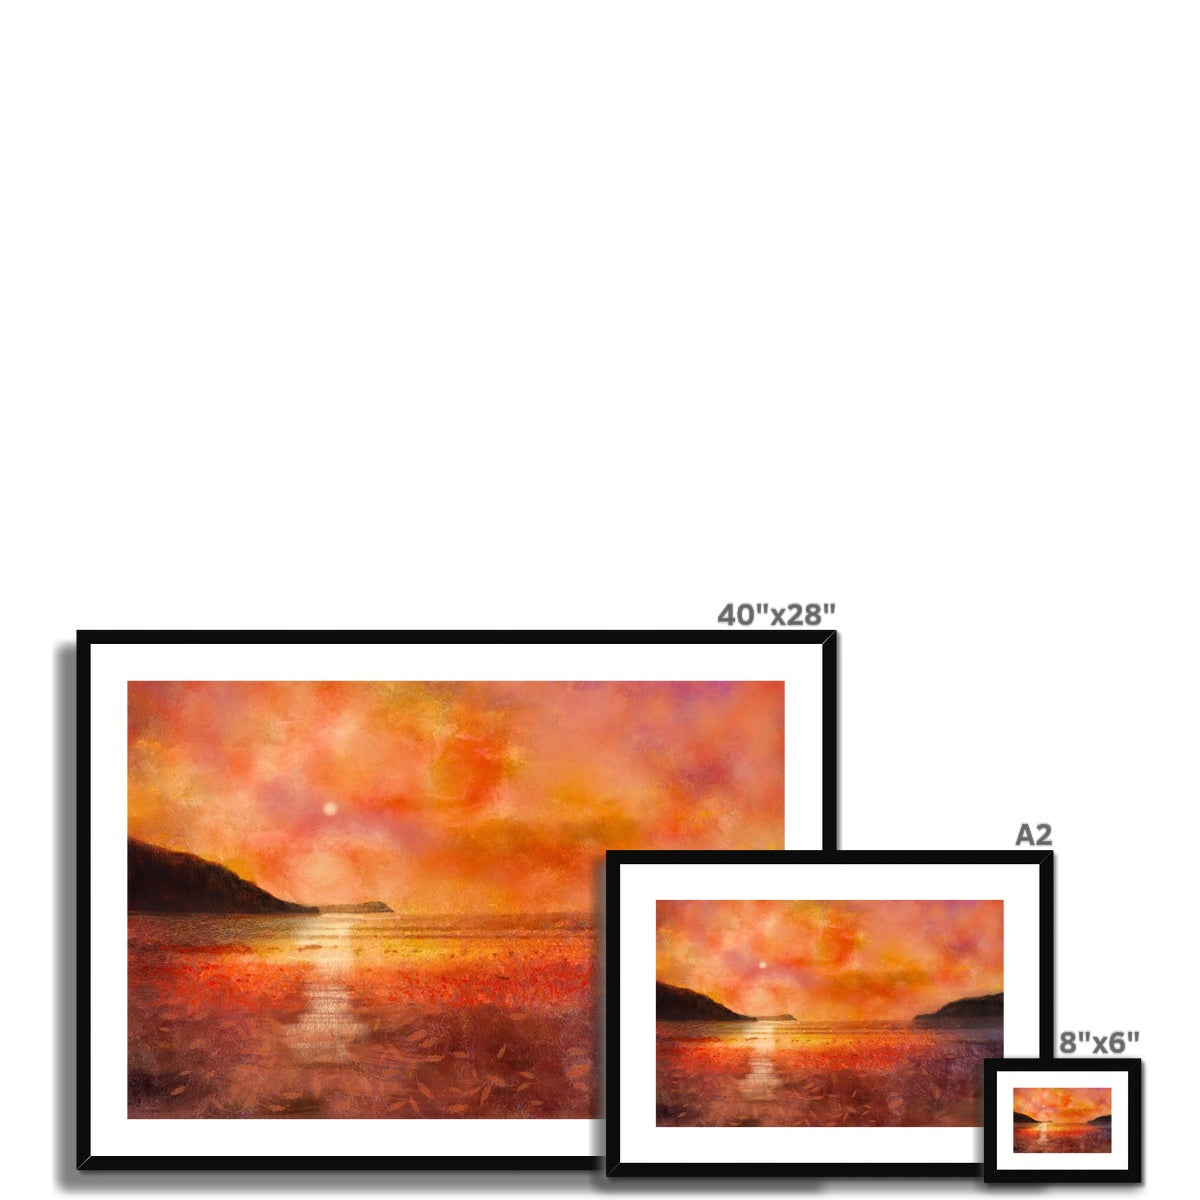 Calgary Beach Sunset Mull Painting | Framed & Mounted Prints From Scotland-Framed & Mounted Prints-Hebridean Islands Art Gallery-Paintings, Prints, Homeware, Art Gifts From Scotland By Scottish Artist Kevin Hunter